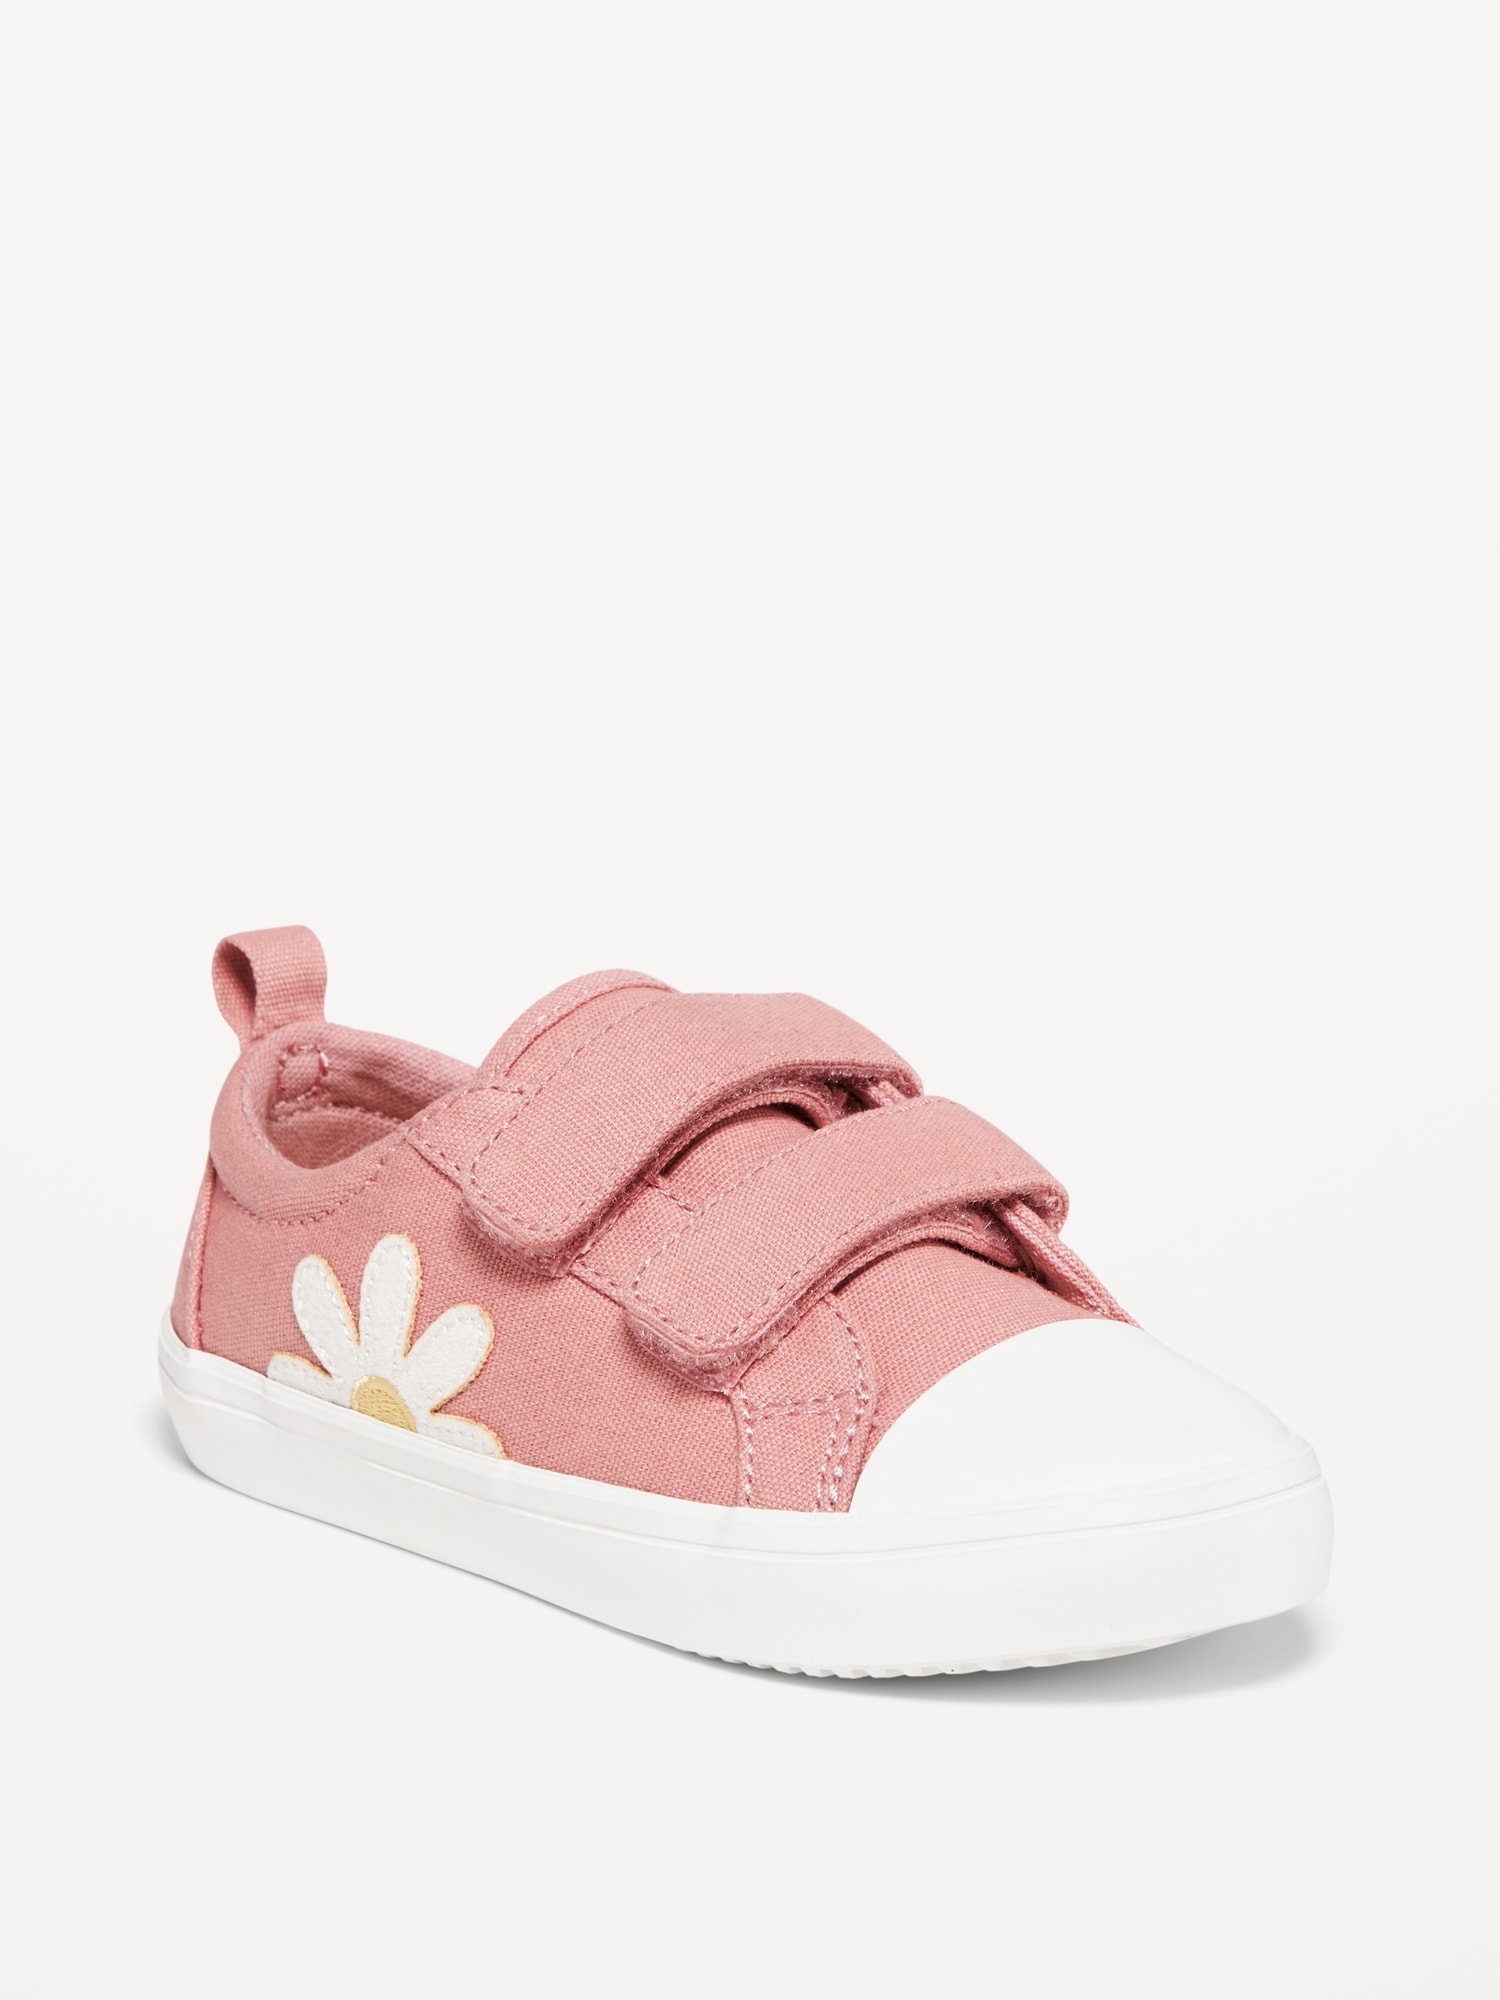 Buy Bubblegummers by Bata Kids Pink Sneakers for Girls at Best Price @ Tata  CLiQ